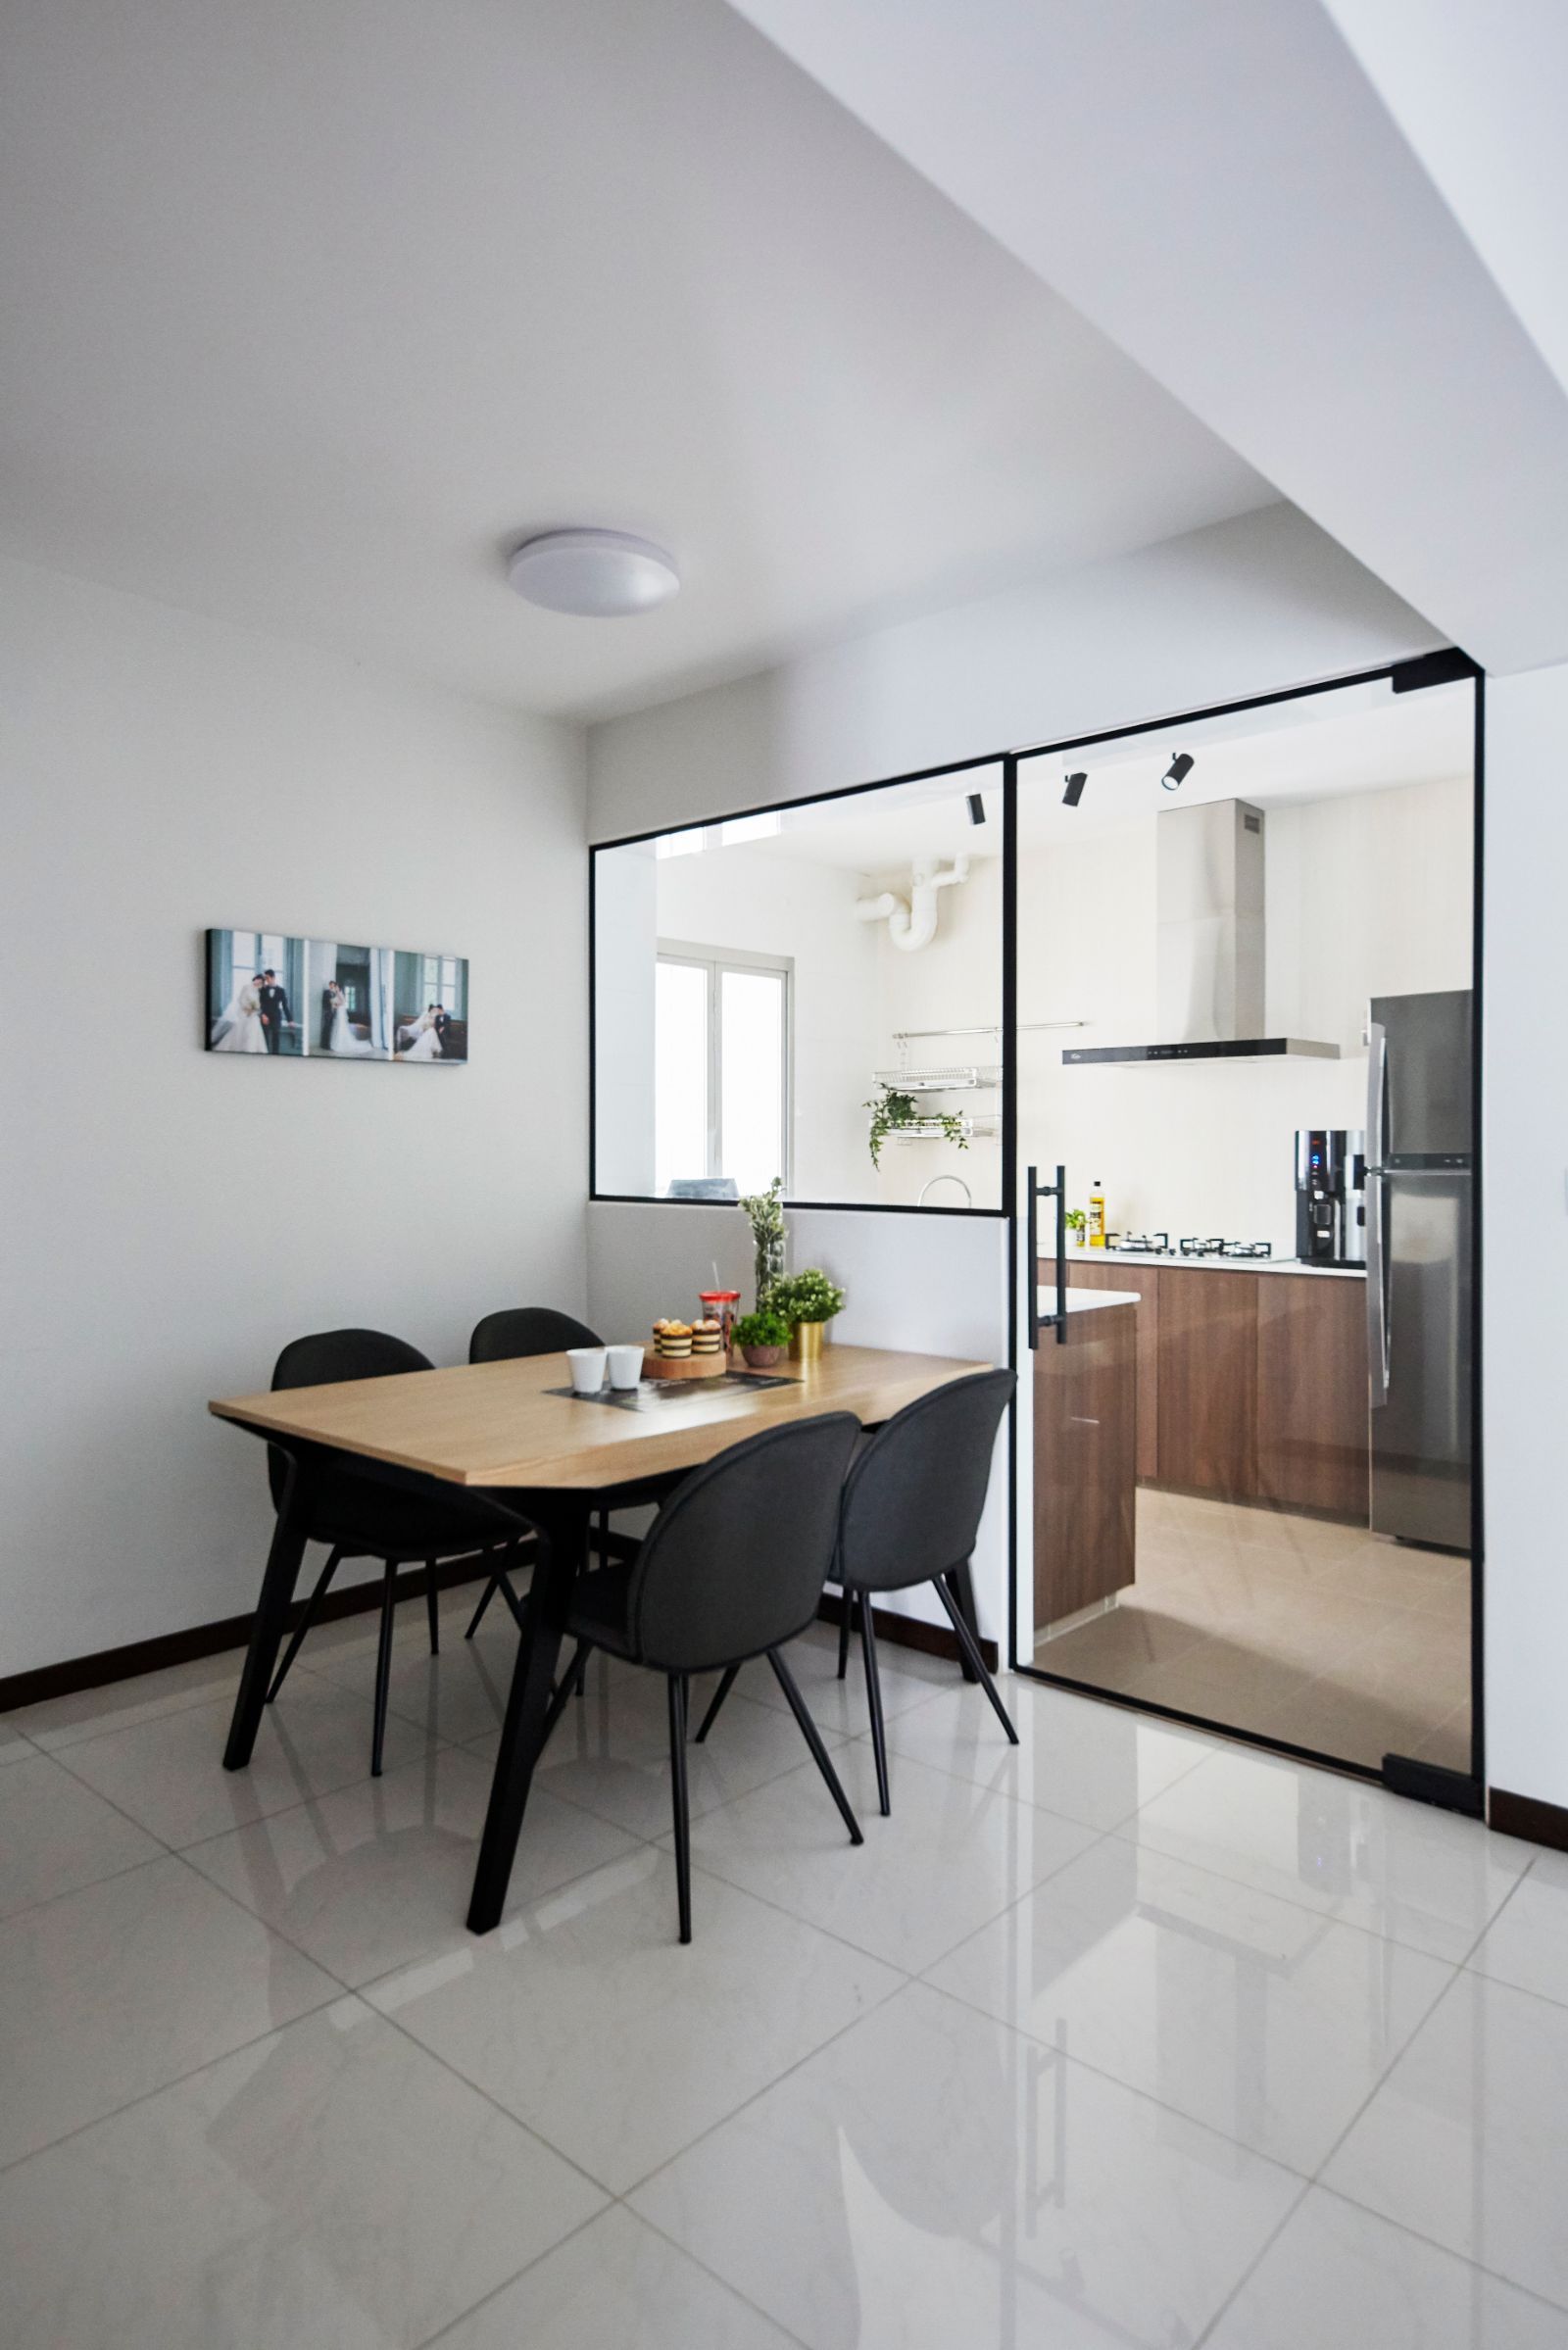 Eclectic, Minimalist, Modern Design - Dining Room - HDB 4 Room - Design by Carpenters 匠